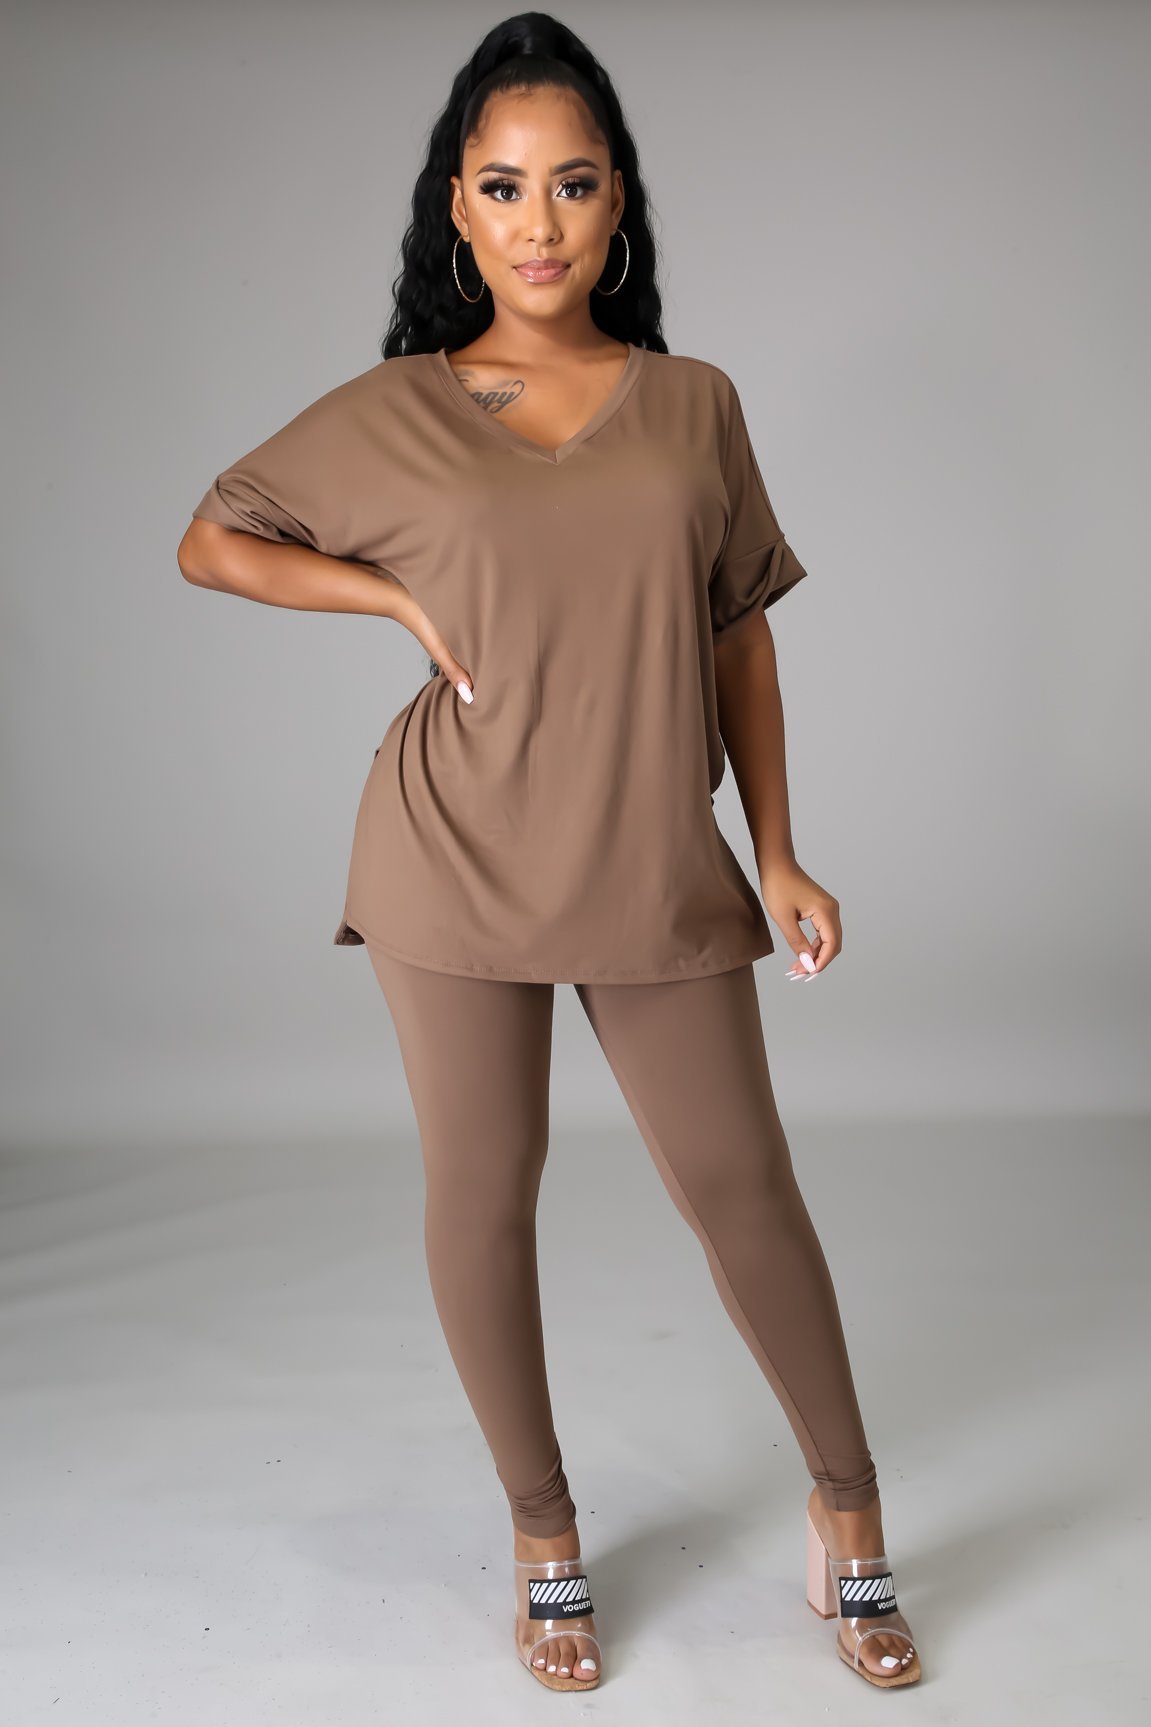 Karter Top and Leggings Set - MY SEXY STYLES